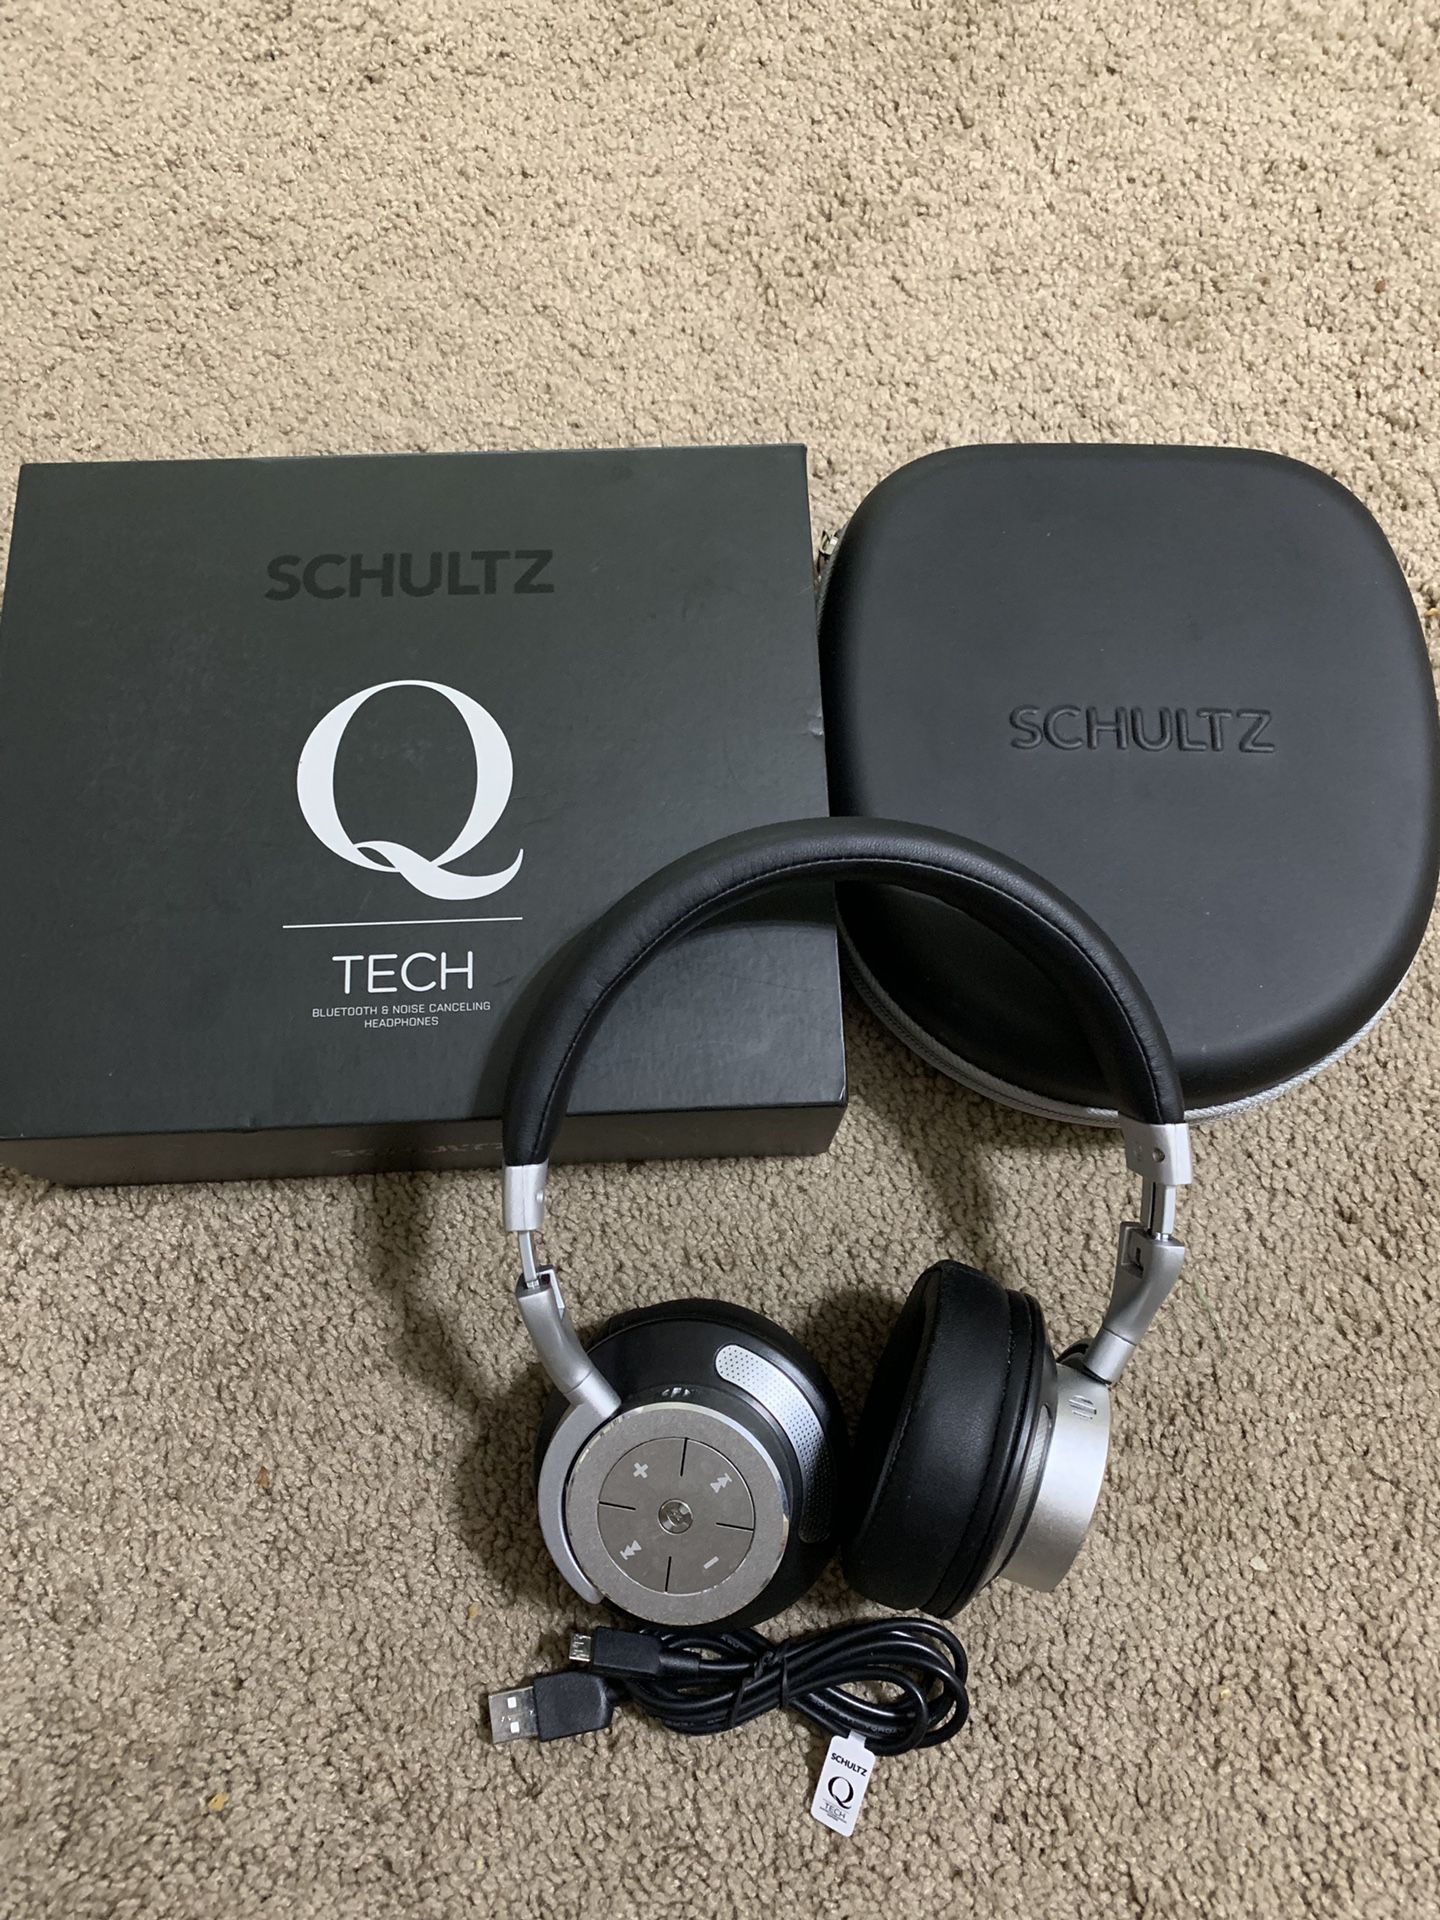 Schultz Q Tech Bluetooth and Noise Canceling LIKE NEW. $150.00 or Best Offer